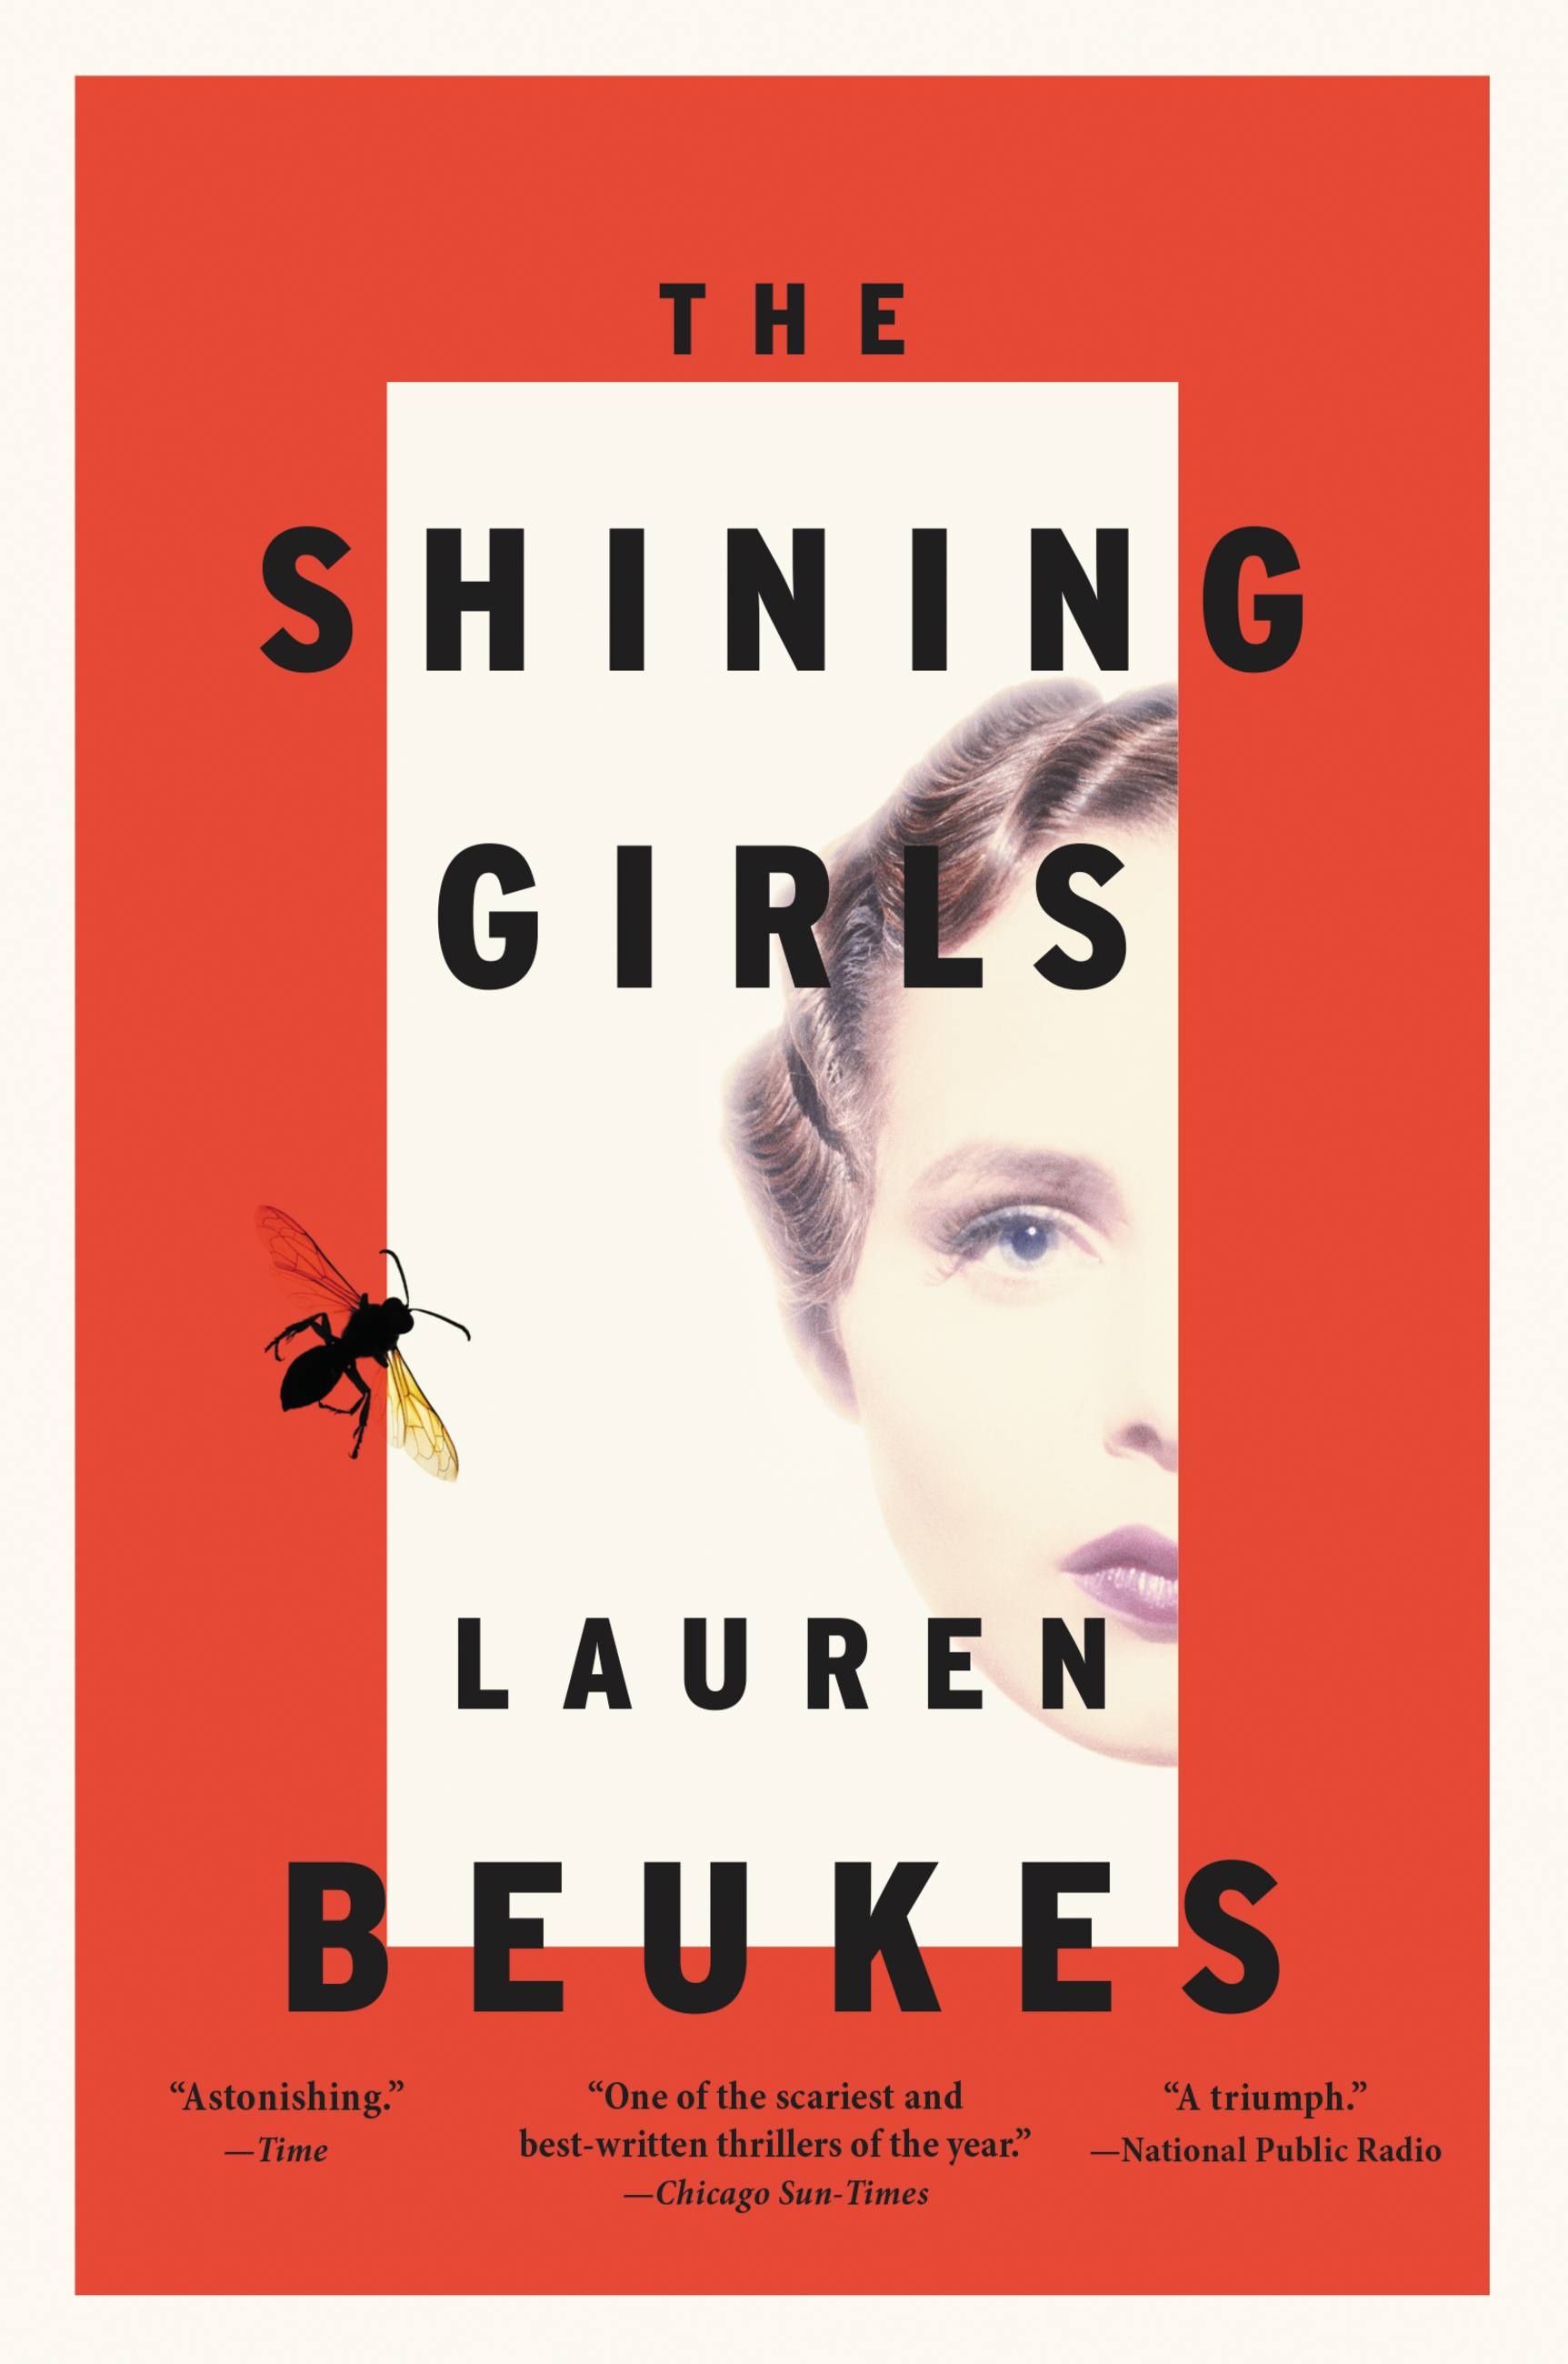 The Shining Girls by Lauren Beukes Hachette Book Group